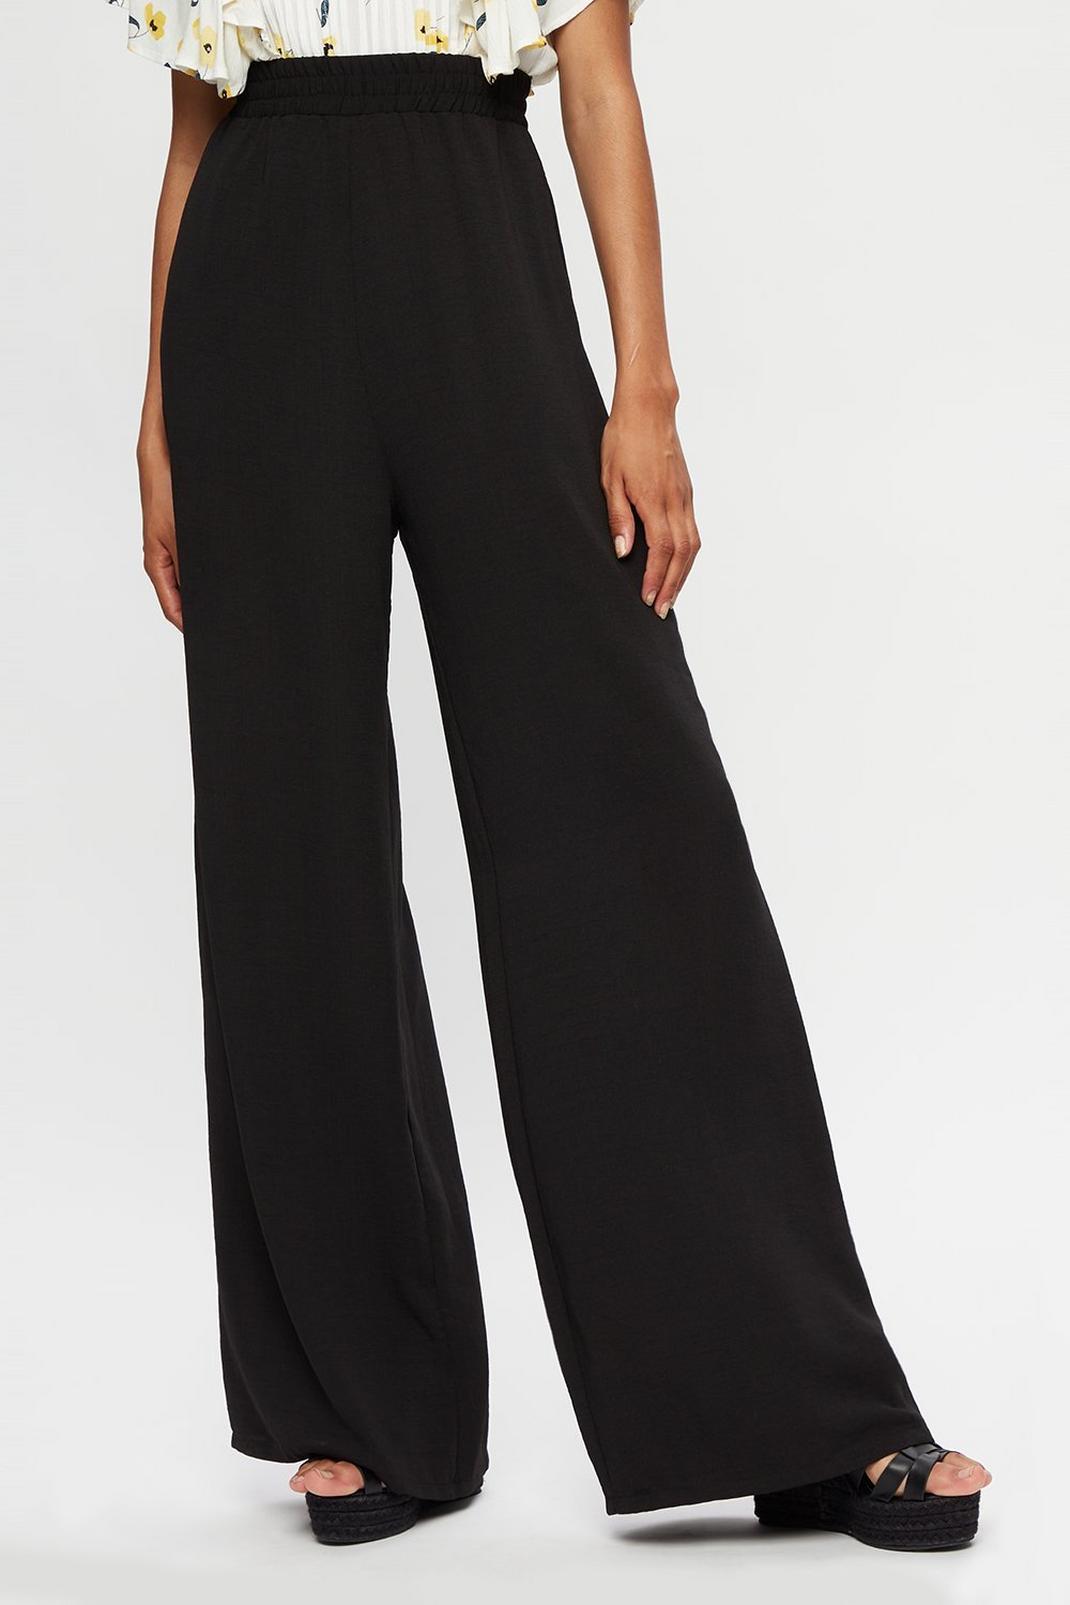 105 Tall Black Palazzo Trouser  image number 2